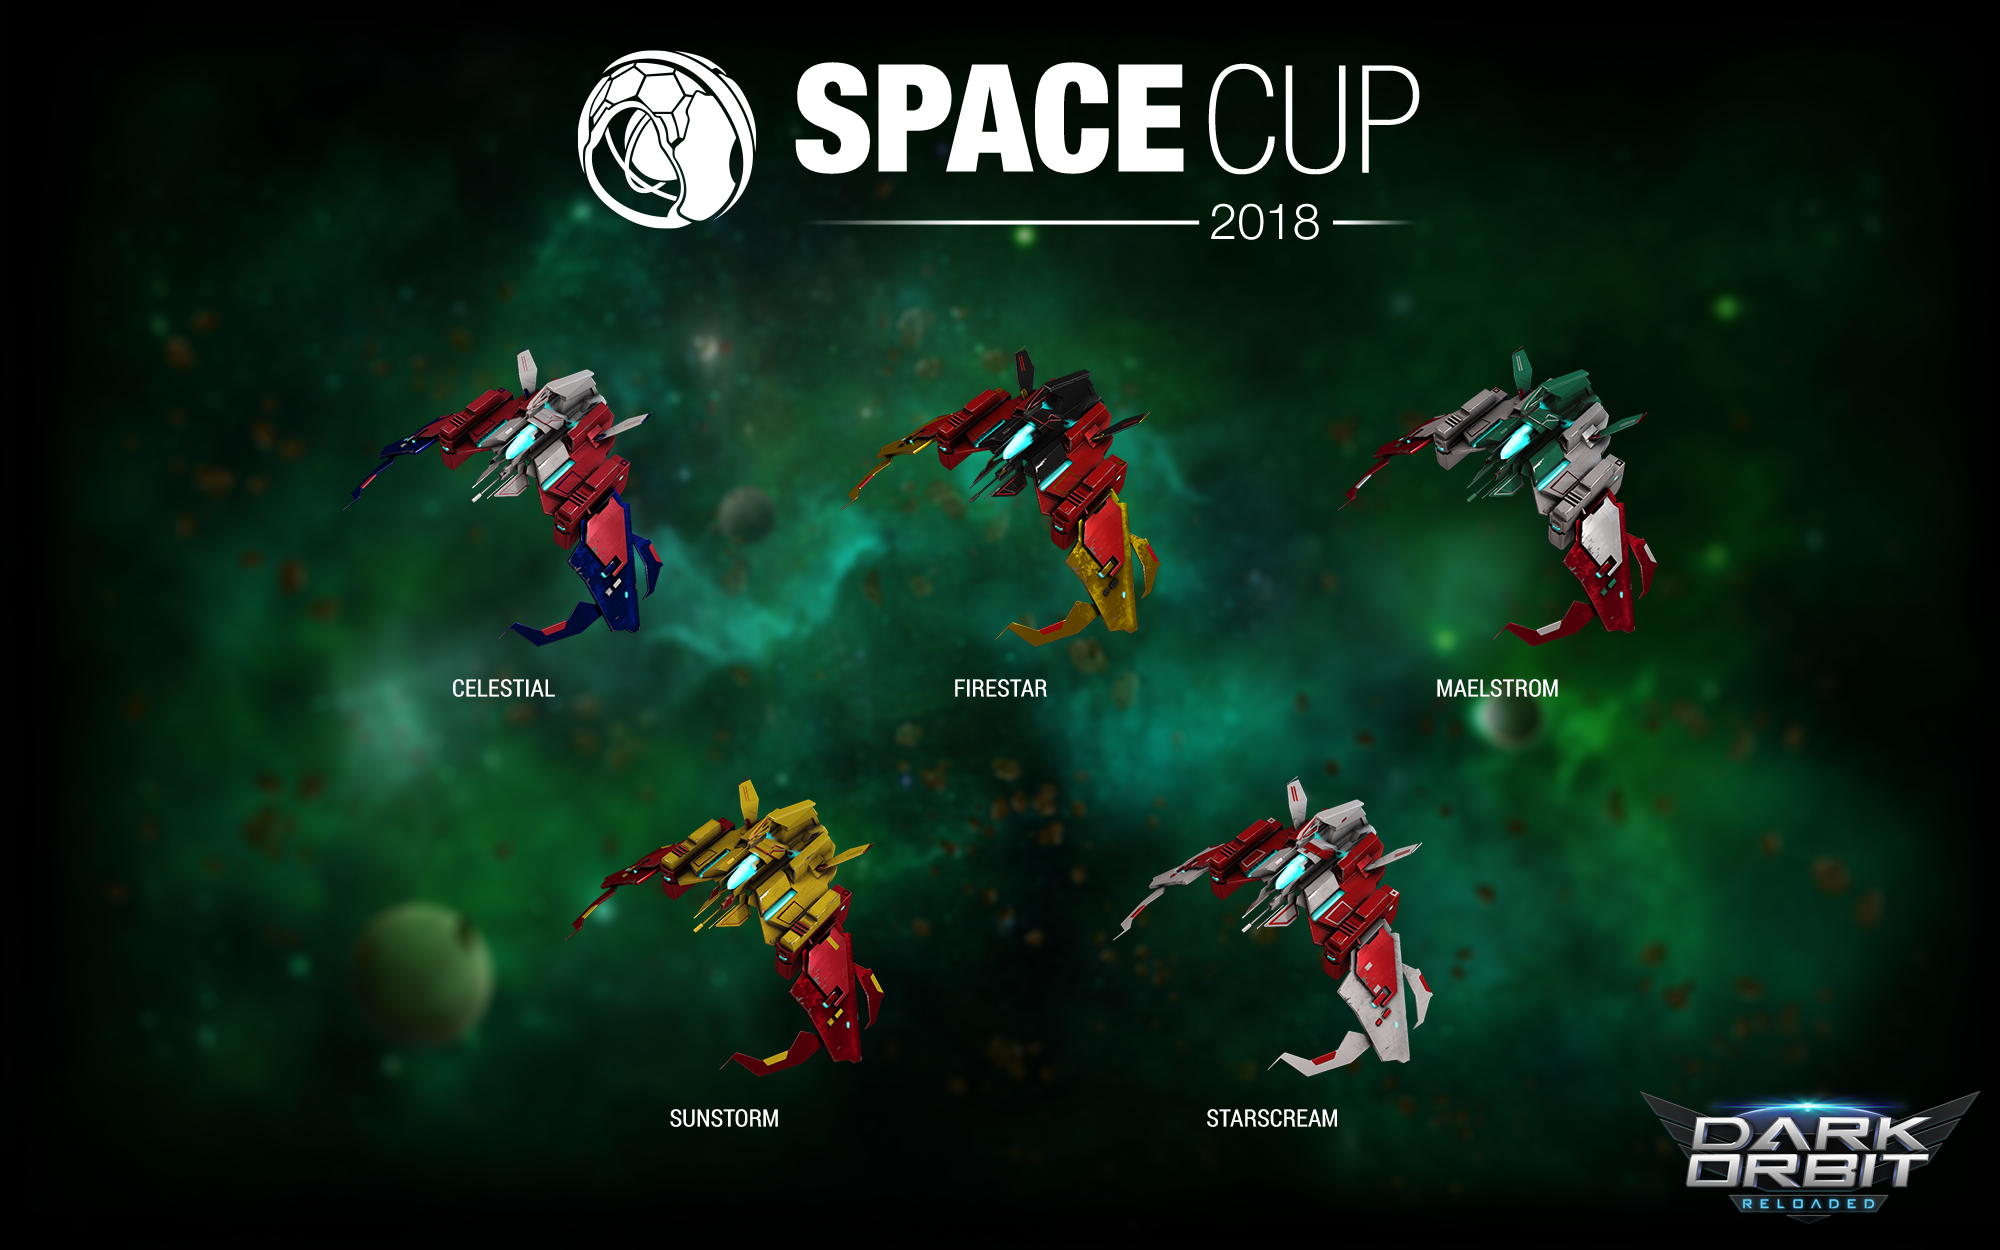 spacecup-2018_ships_2000x1250.png